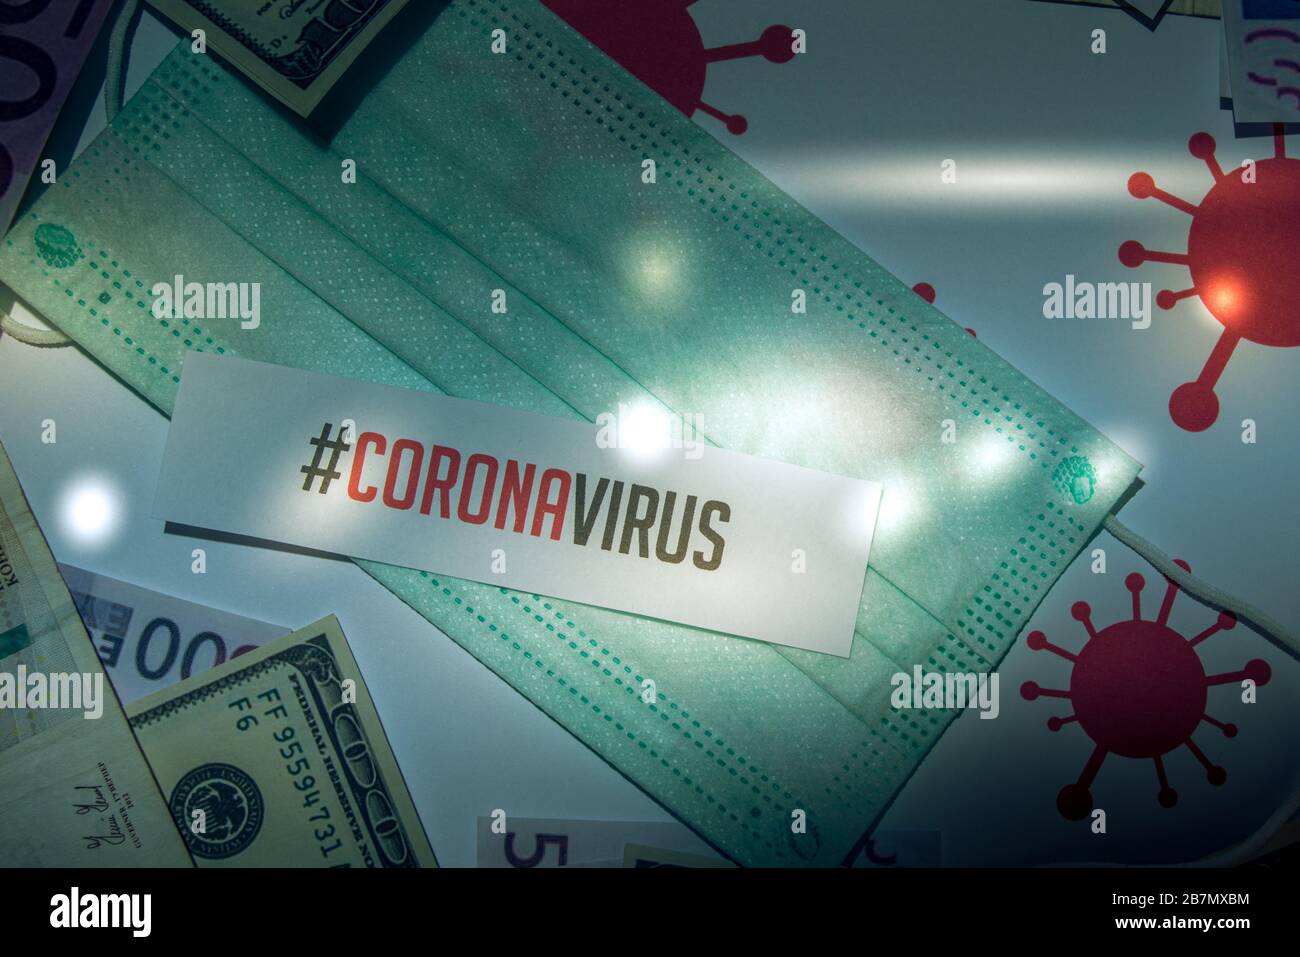 Corona virus impact on American economy concept, banknotes with medical mask and banknotes Stock Photo